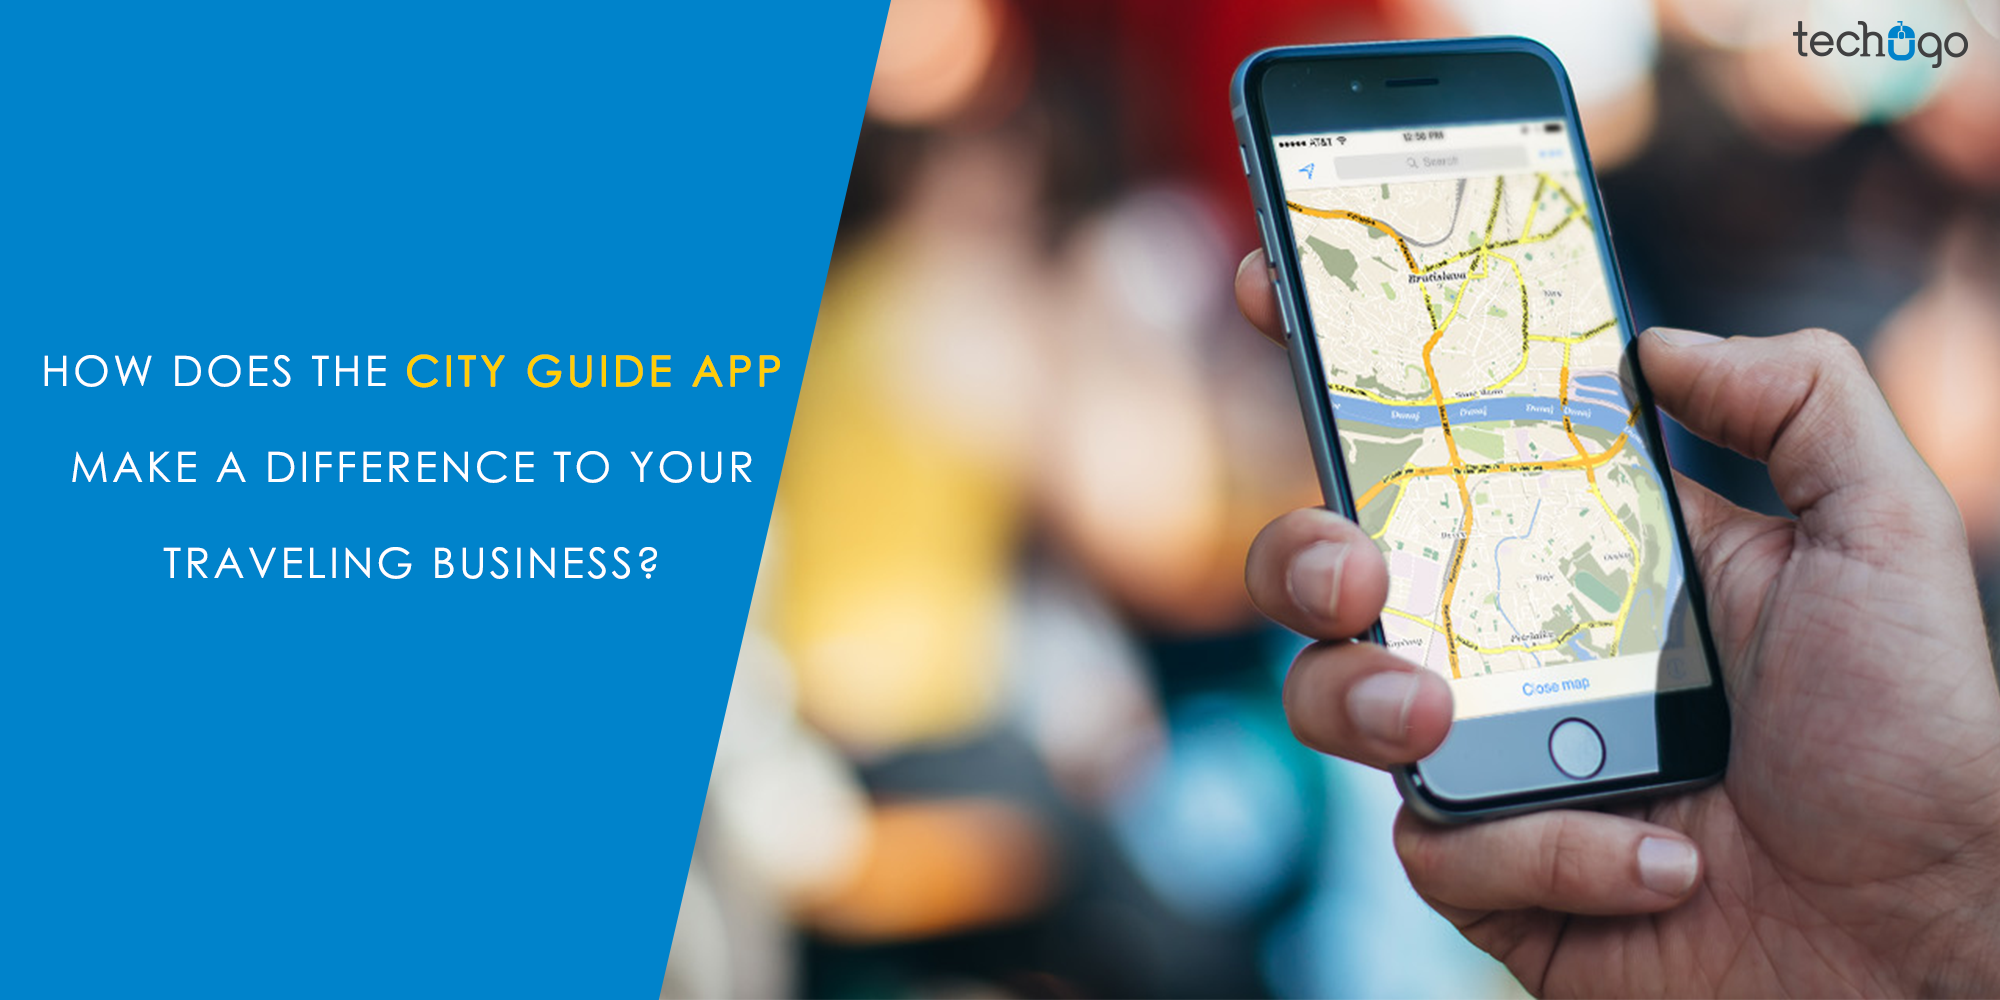 How Does The City Guide App Make A Difference To Your Traveling Business?